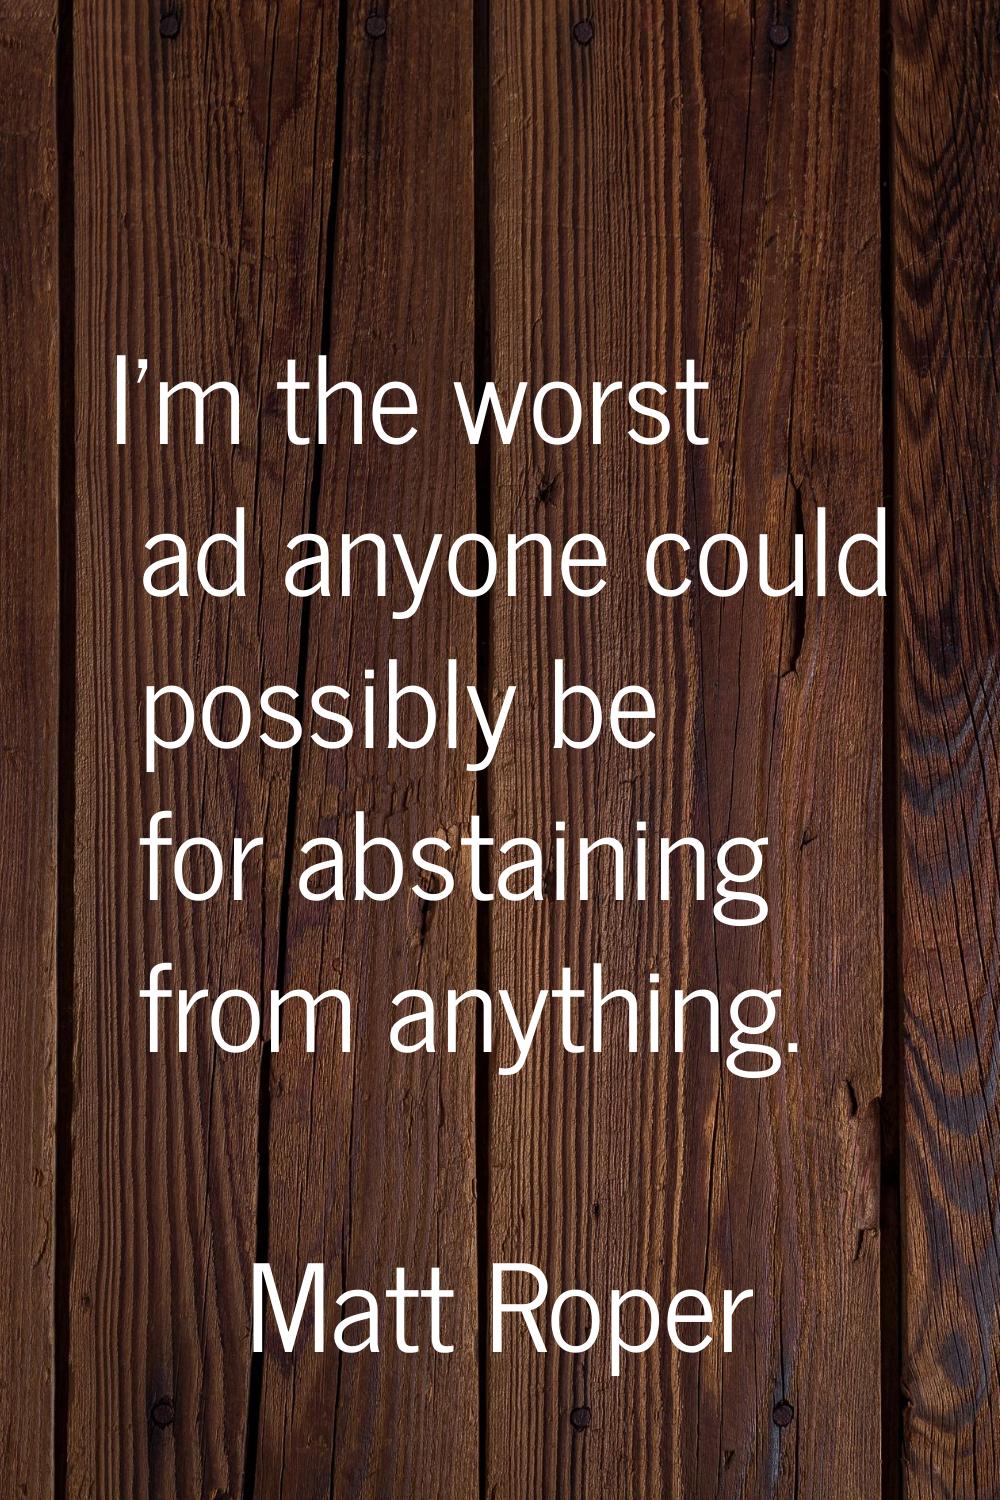 I'm the worst ad anyone could possibly be for abstaining from anything.